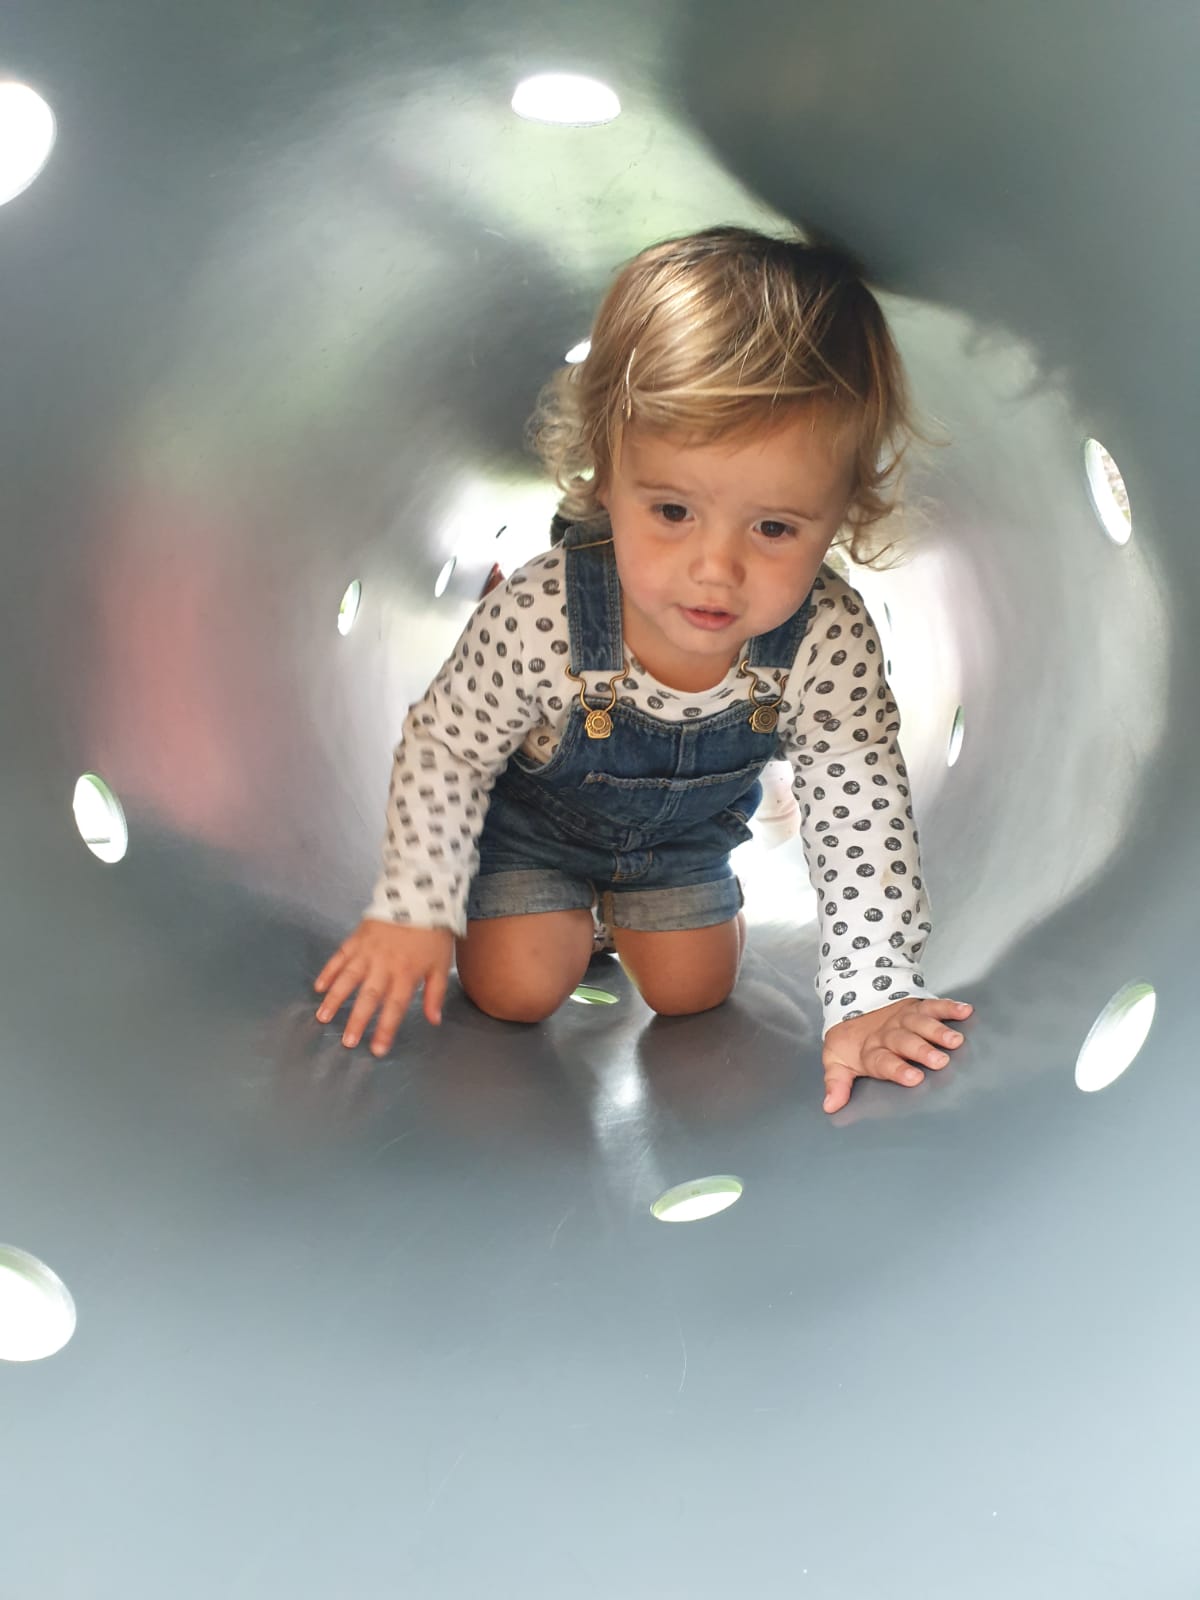 Child playing in tunnel